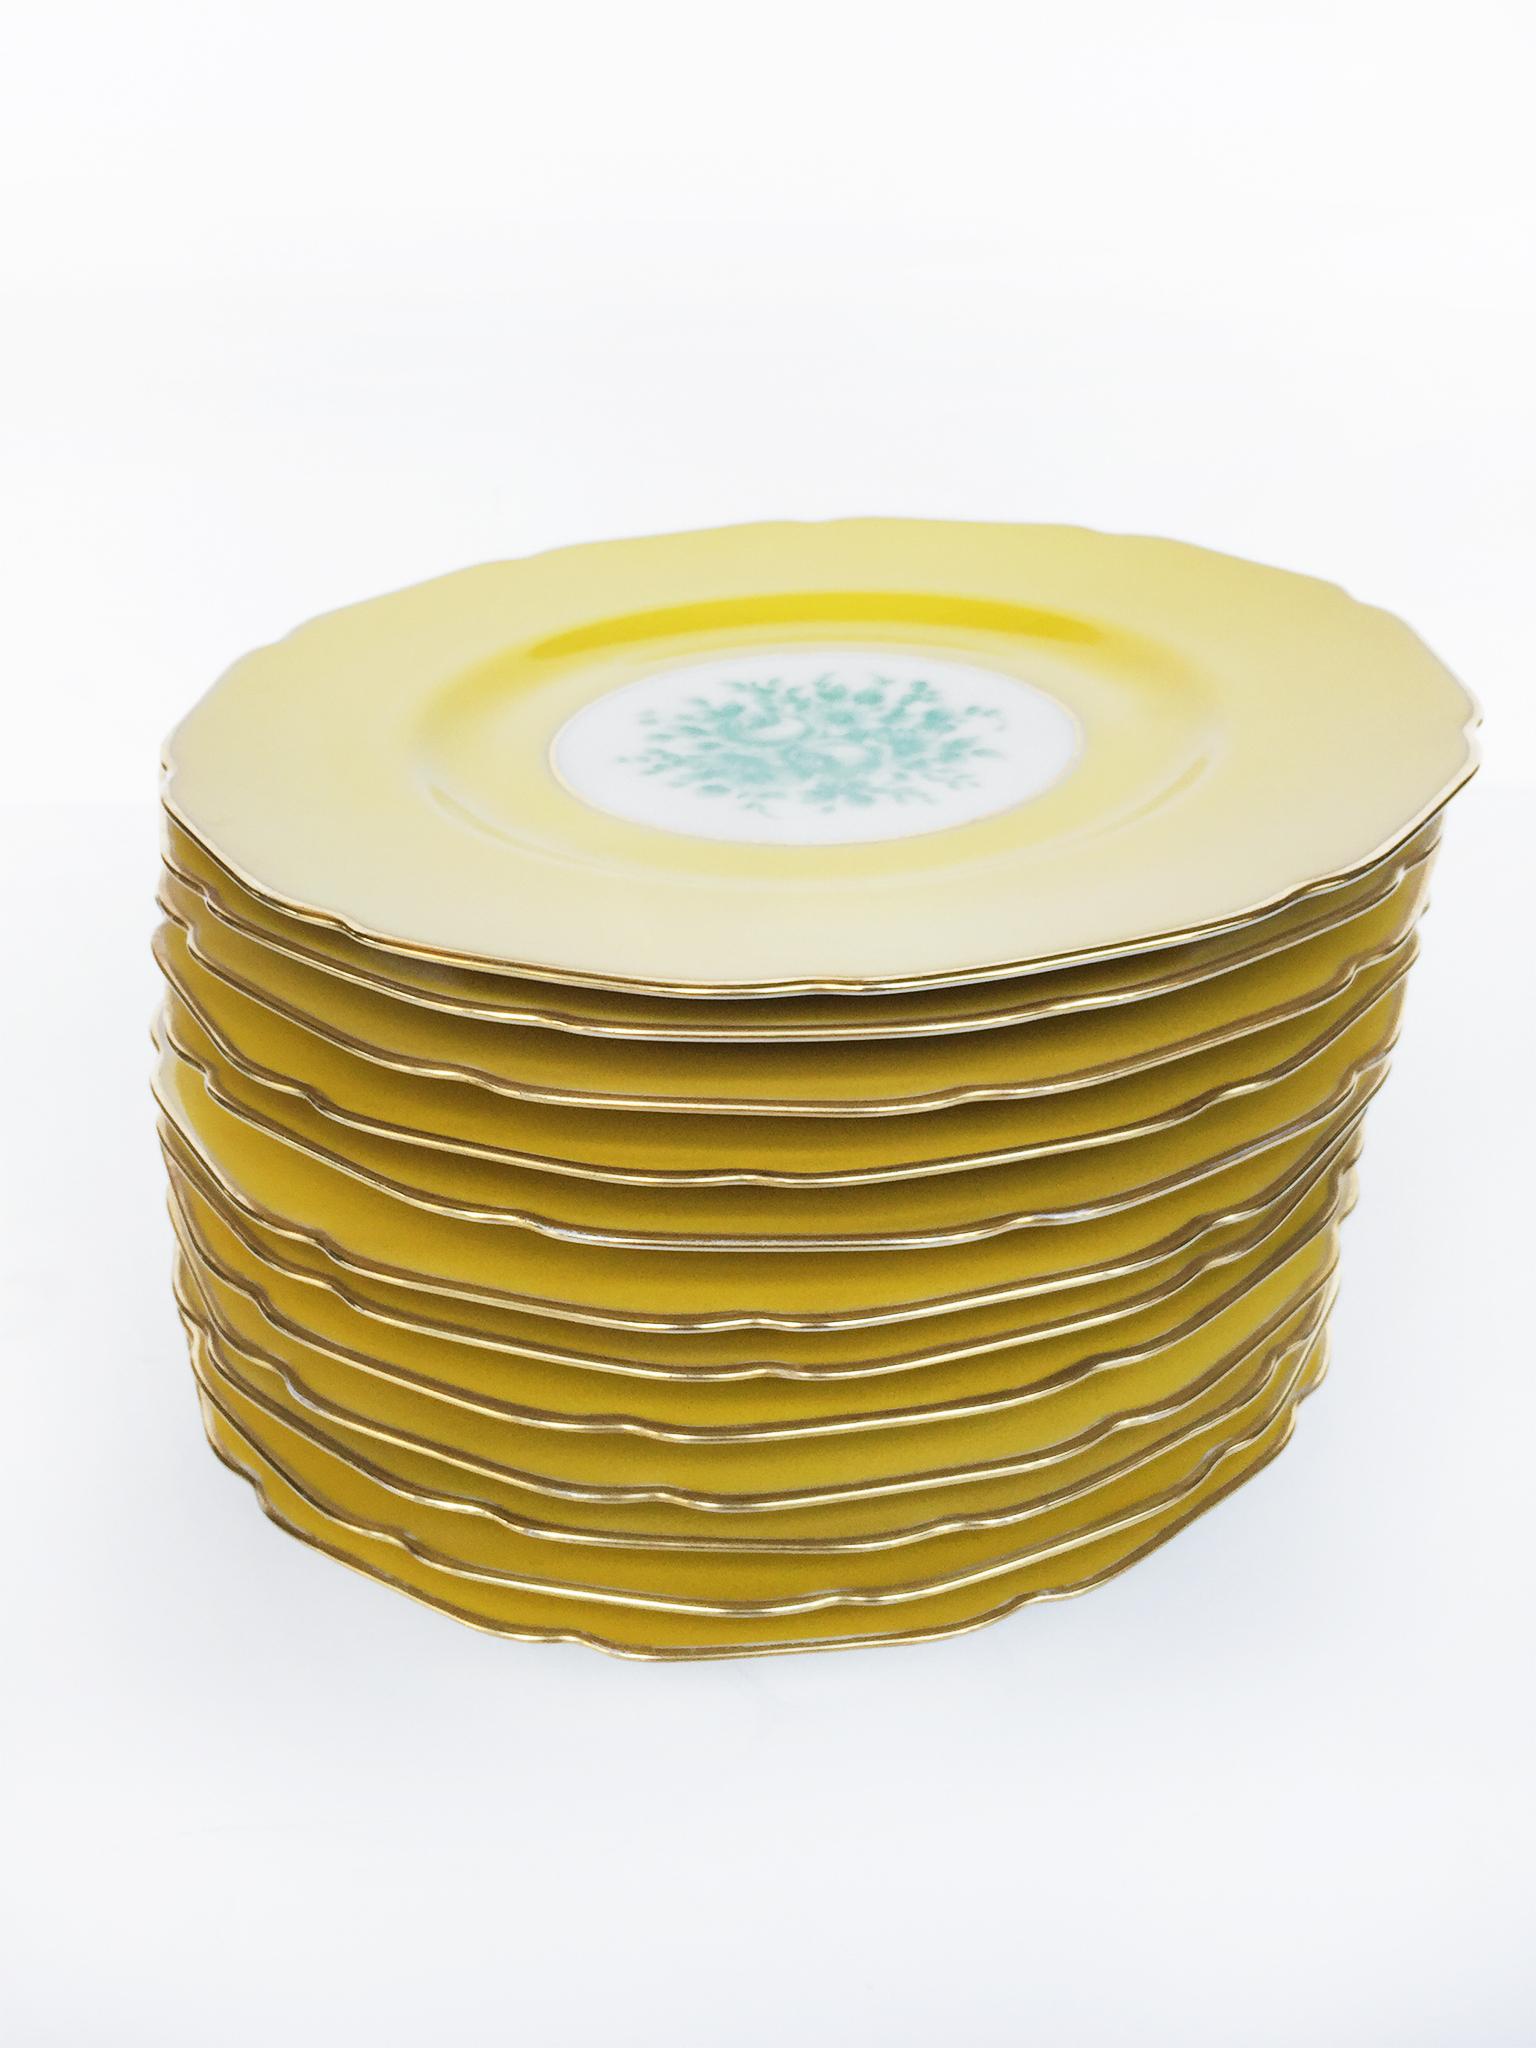 This set of yellow porcelain china consists of 12 dinner plates with two added bread-and-butter plates. The plates were manufactured by Black Knight in the 1930s in Germany and distributed in the United States. They are a gorgeous sunflower-yellow